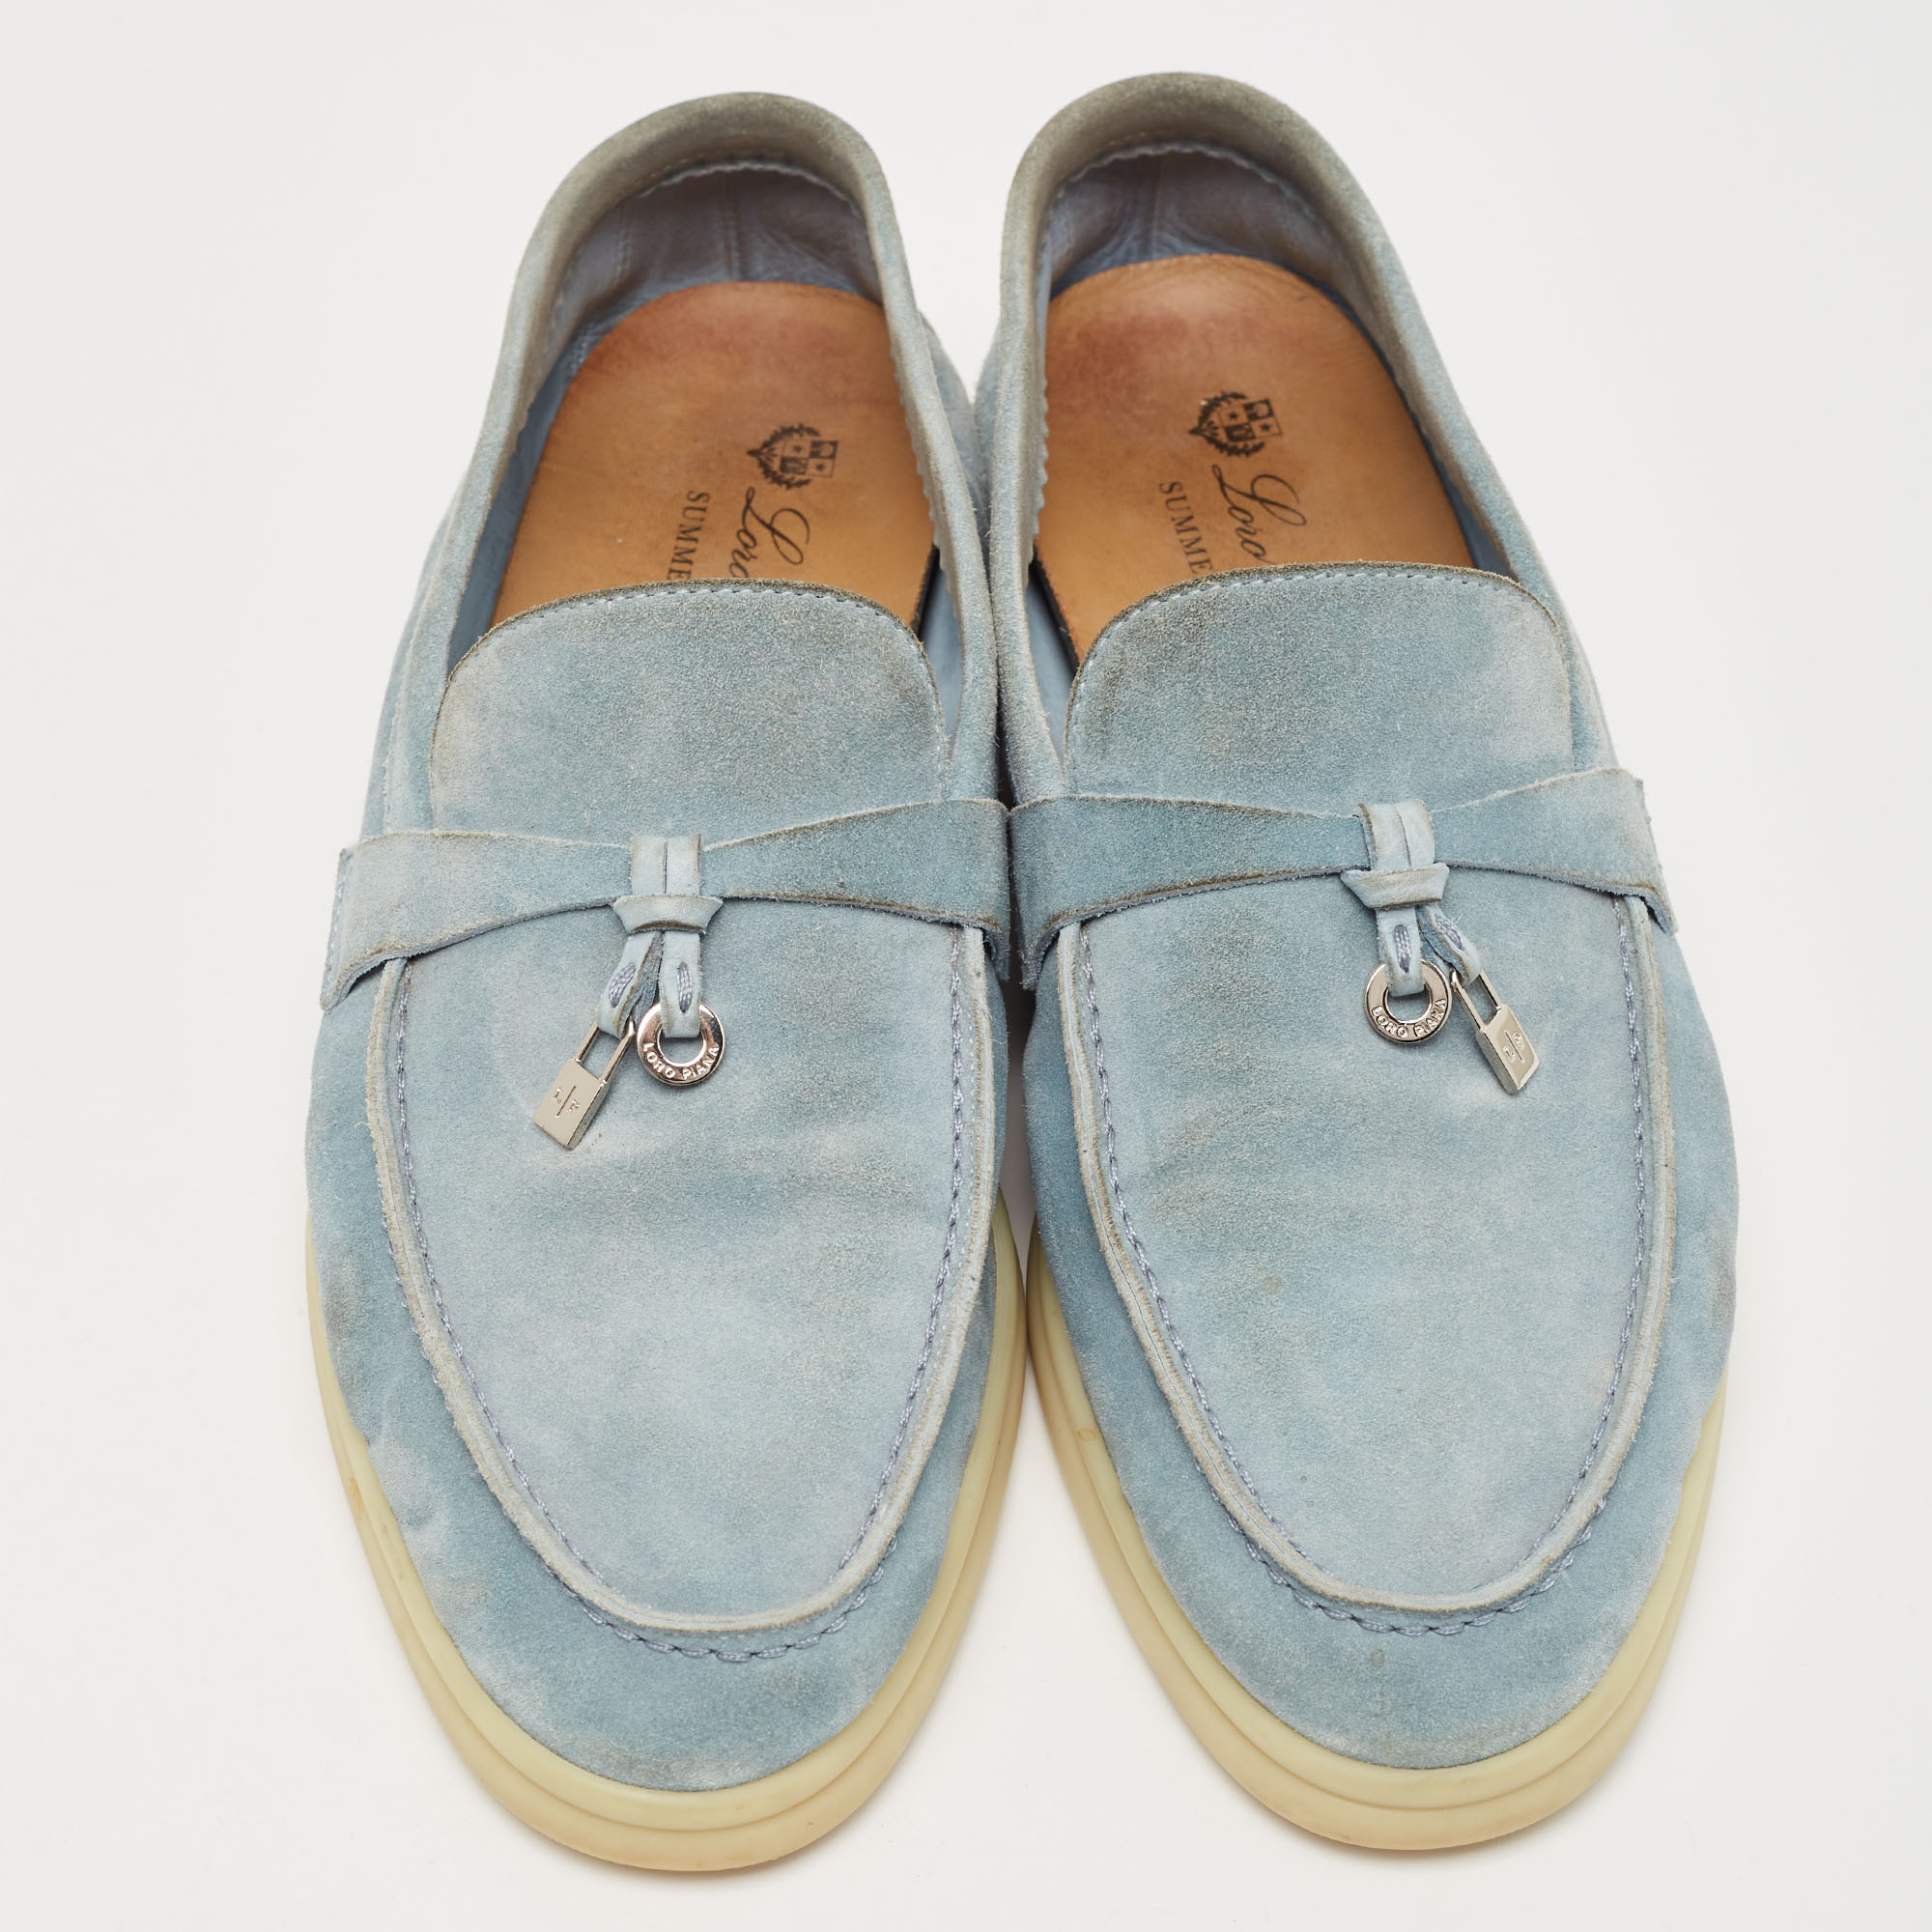 Loro Piana Light Blue Suede Summer Charms Walk Loafers Size 39